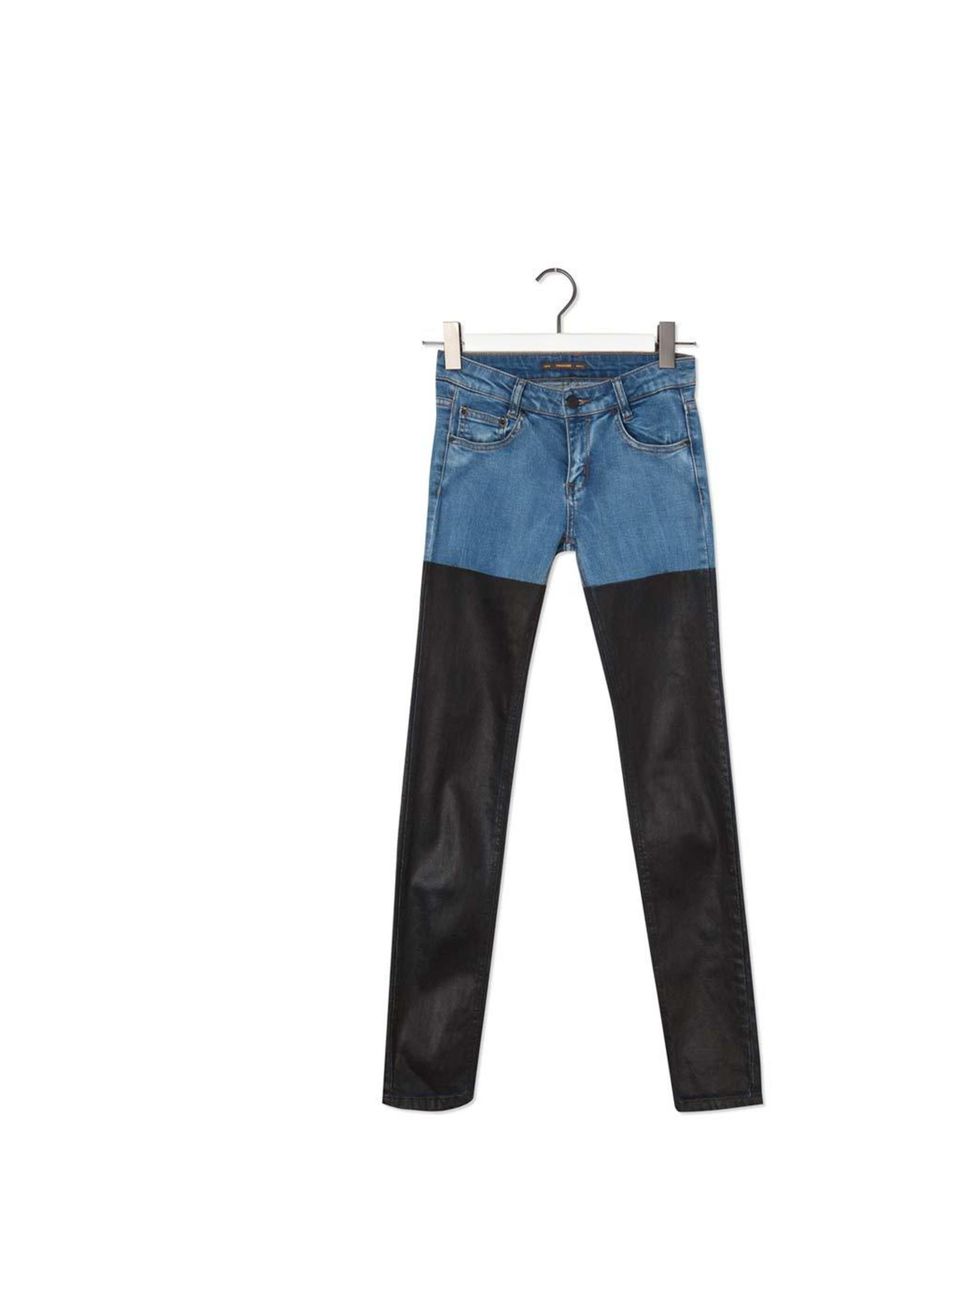 <p>Production & Bookings Assistant Melanie De La Cruz will wear these dipped jeans with a pair of chunky flatforms and a white tee. </p><p><a href="http://www.pullandbear.com/webapp/wcs/stores/servlet/category/pullandbeargb/en/pullandbear/29022/Jeans?SALE